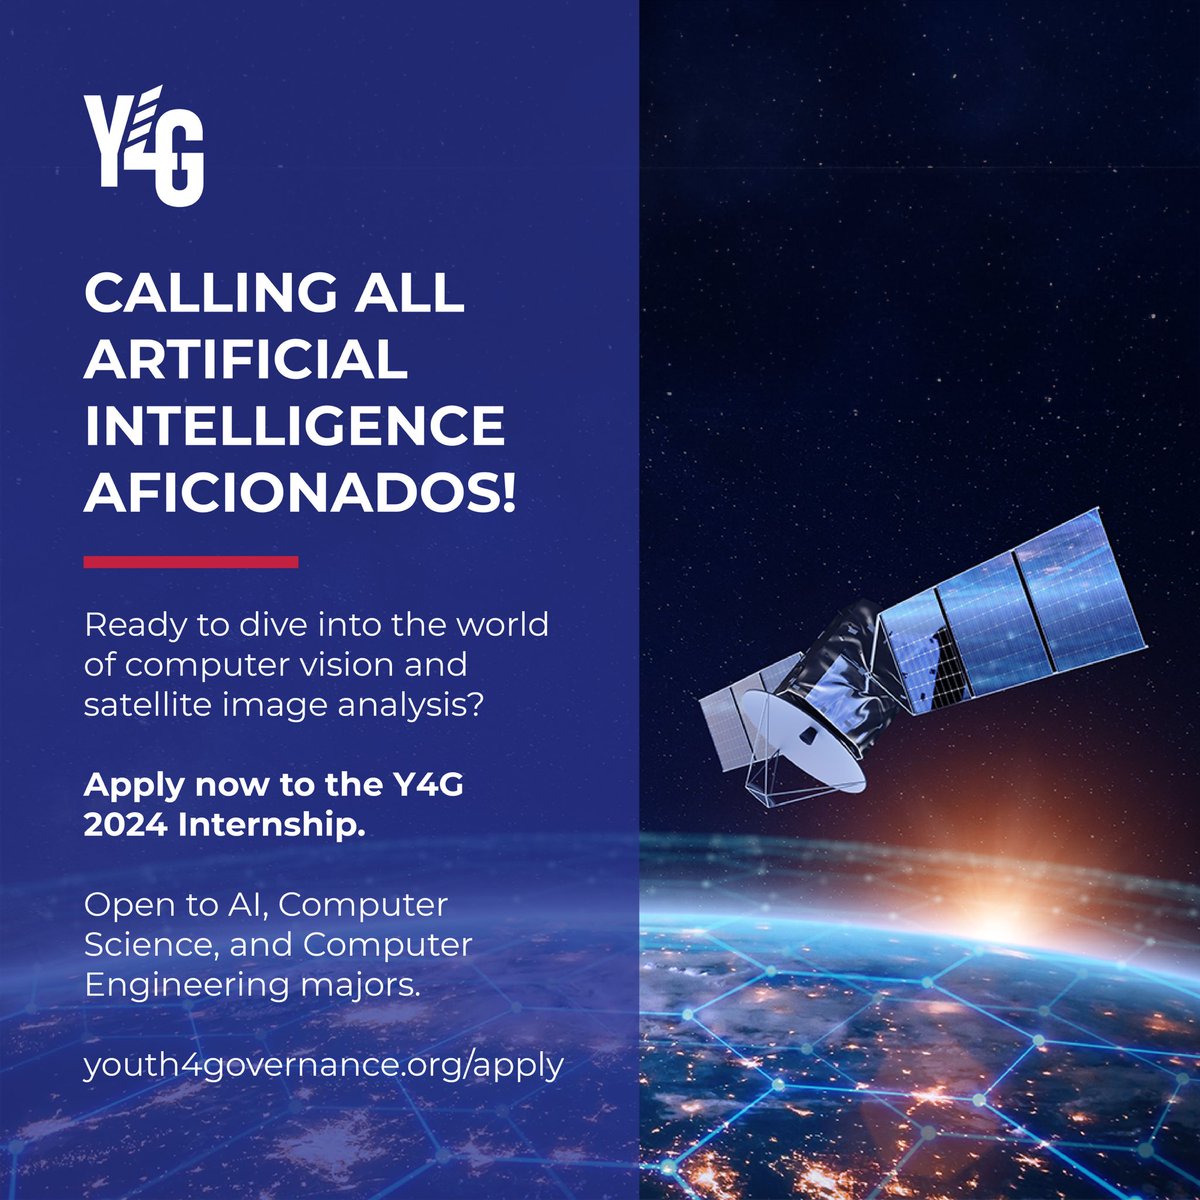 Are you passionate about the cutting-edge realm of #AI? Are you curious delving into the worlds of #ComputerVision & satellite #ImageAnalysis? If so, we have thrilling news for you! We are receiving your applications to join the Y4G program.

📣 Apply now youth4governance.org/apply/